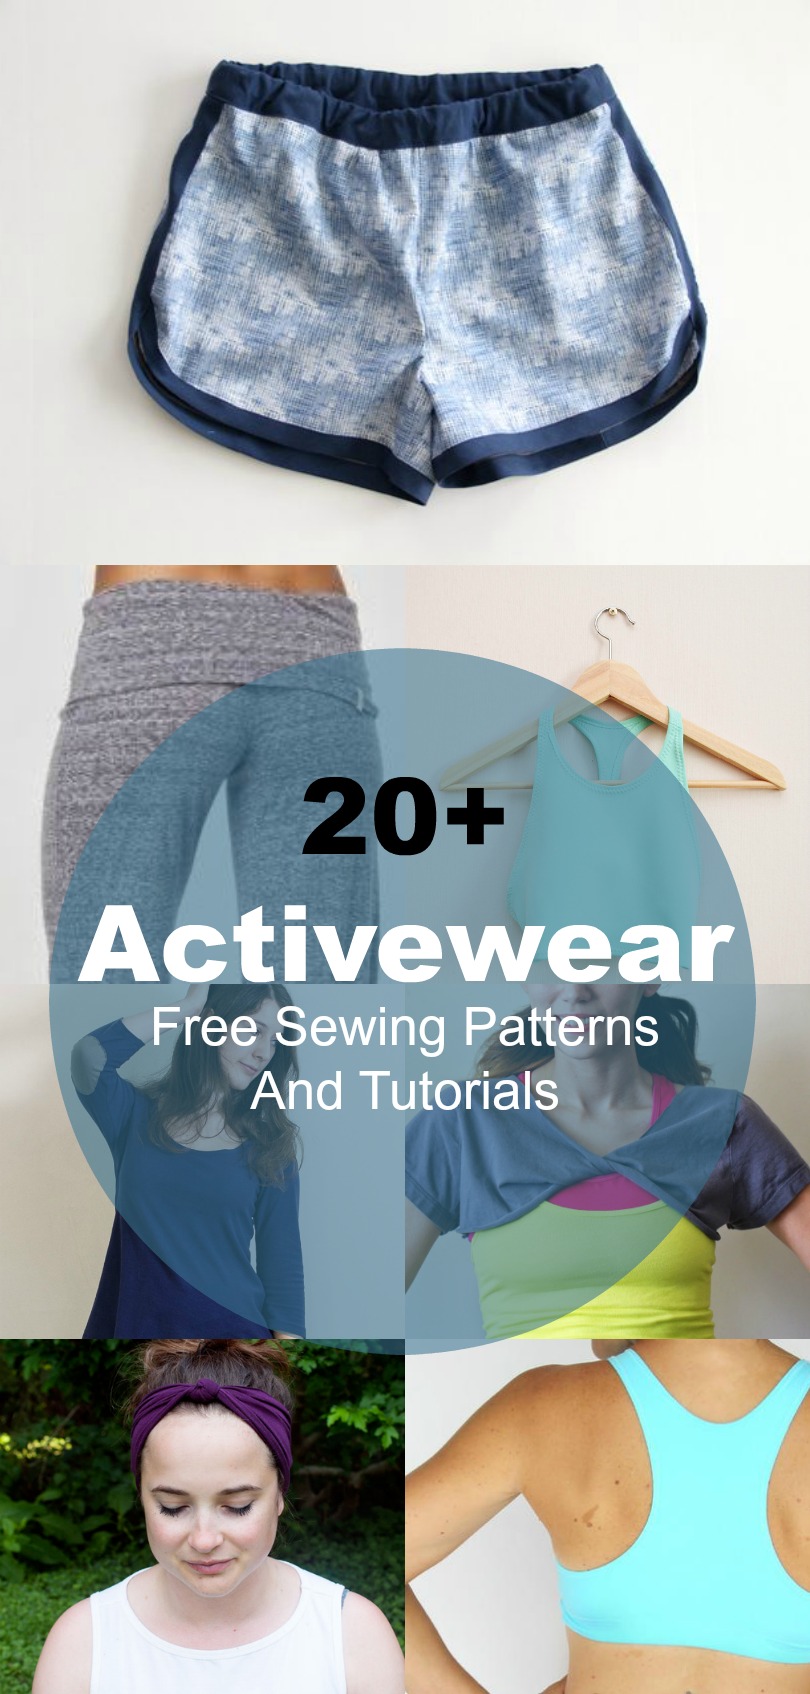 https://www.onthecuttingfloor.com/wp-content/uploads/2017/01/20-activewear-free-sewing-patterns-and-tutorials.jpg